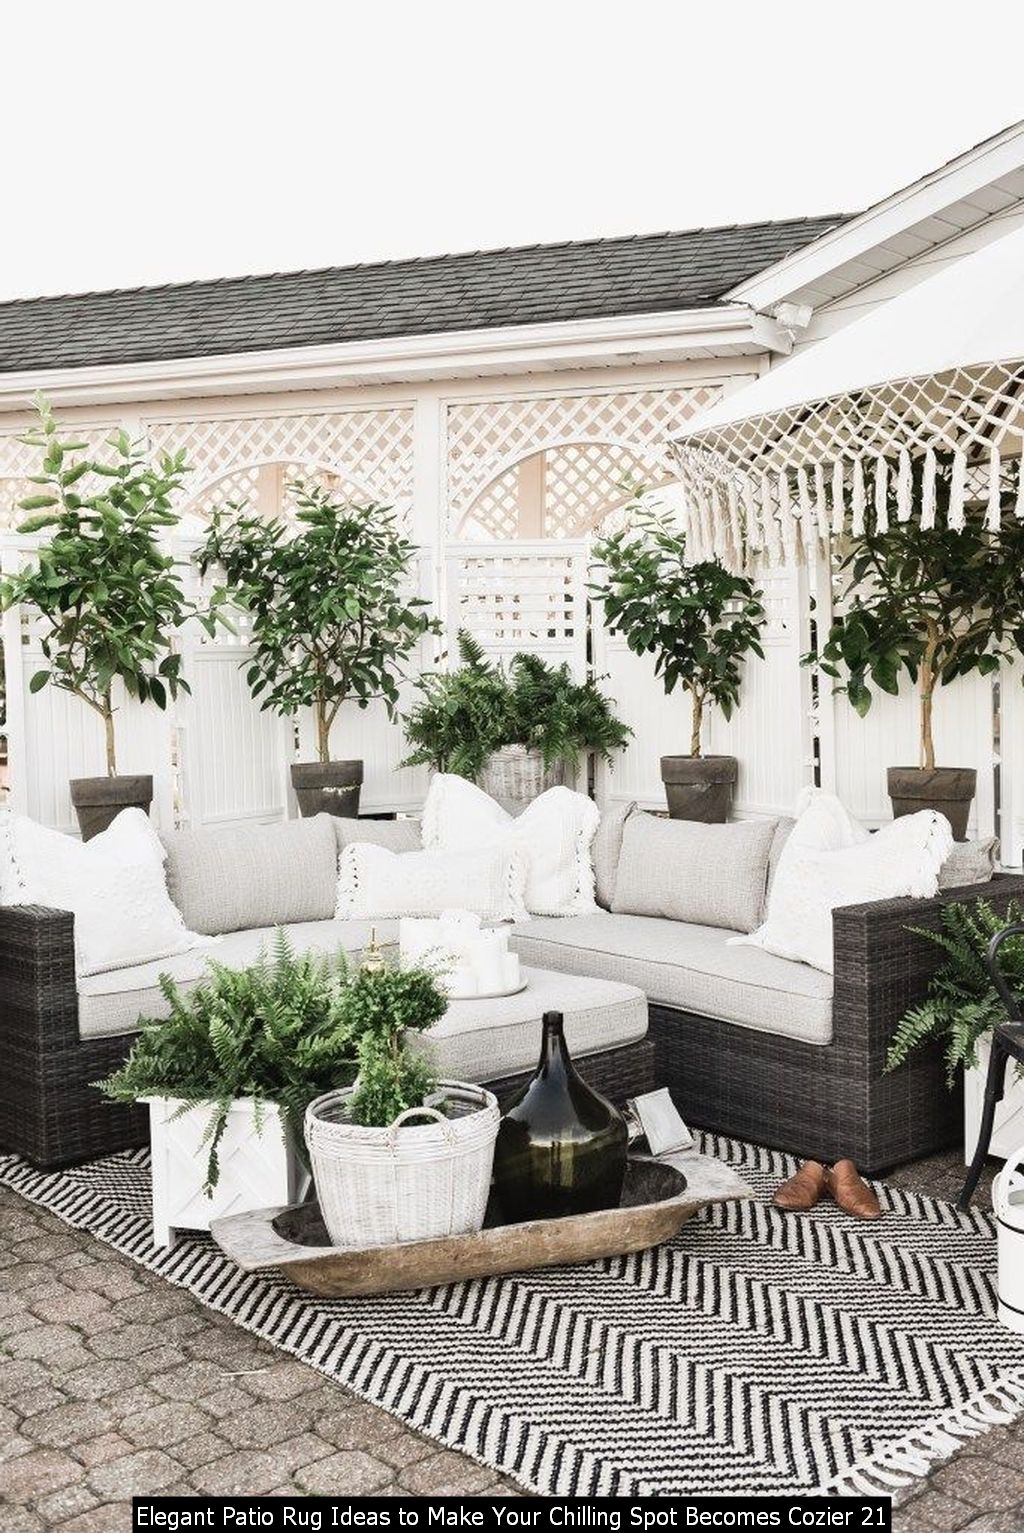 Elegant Patio Rug Ideas To Make Your Chilling Spot Becomes Cozier 21